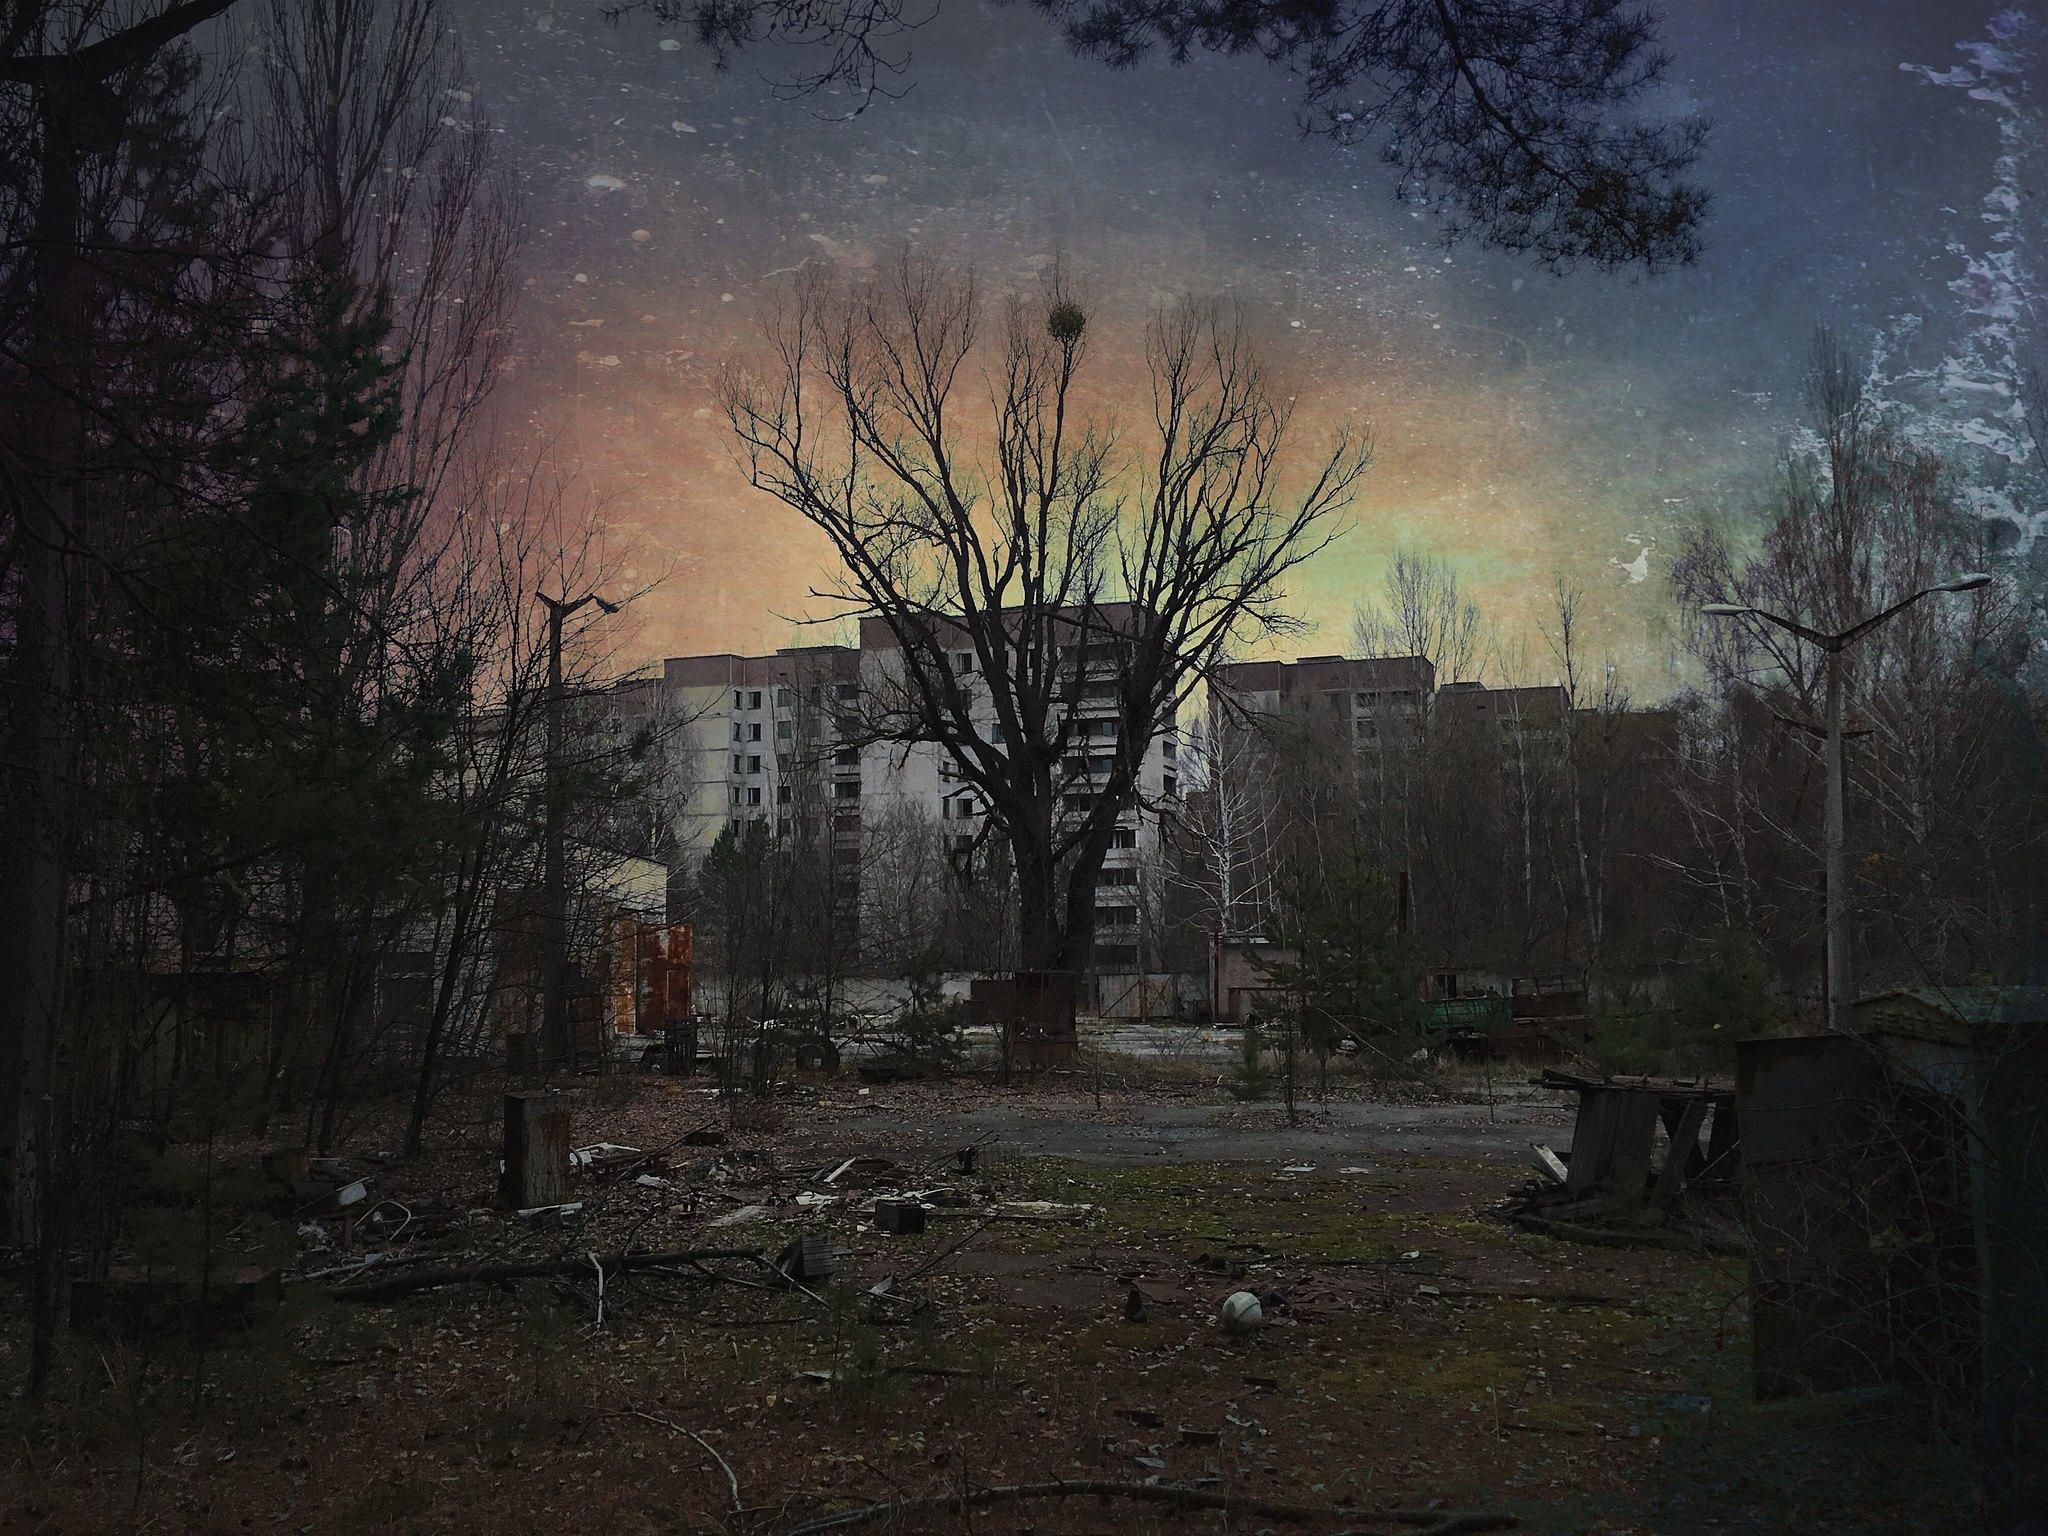 Stunning Chernobyl pics reveal haunting scenes at abandoned nuclear